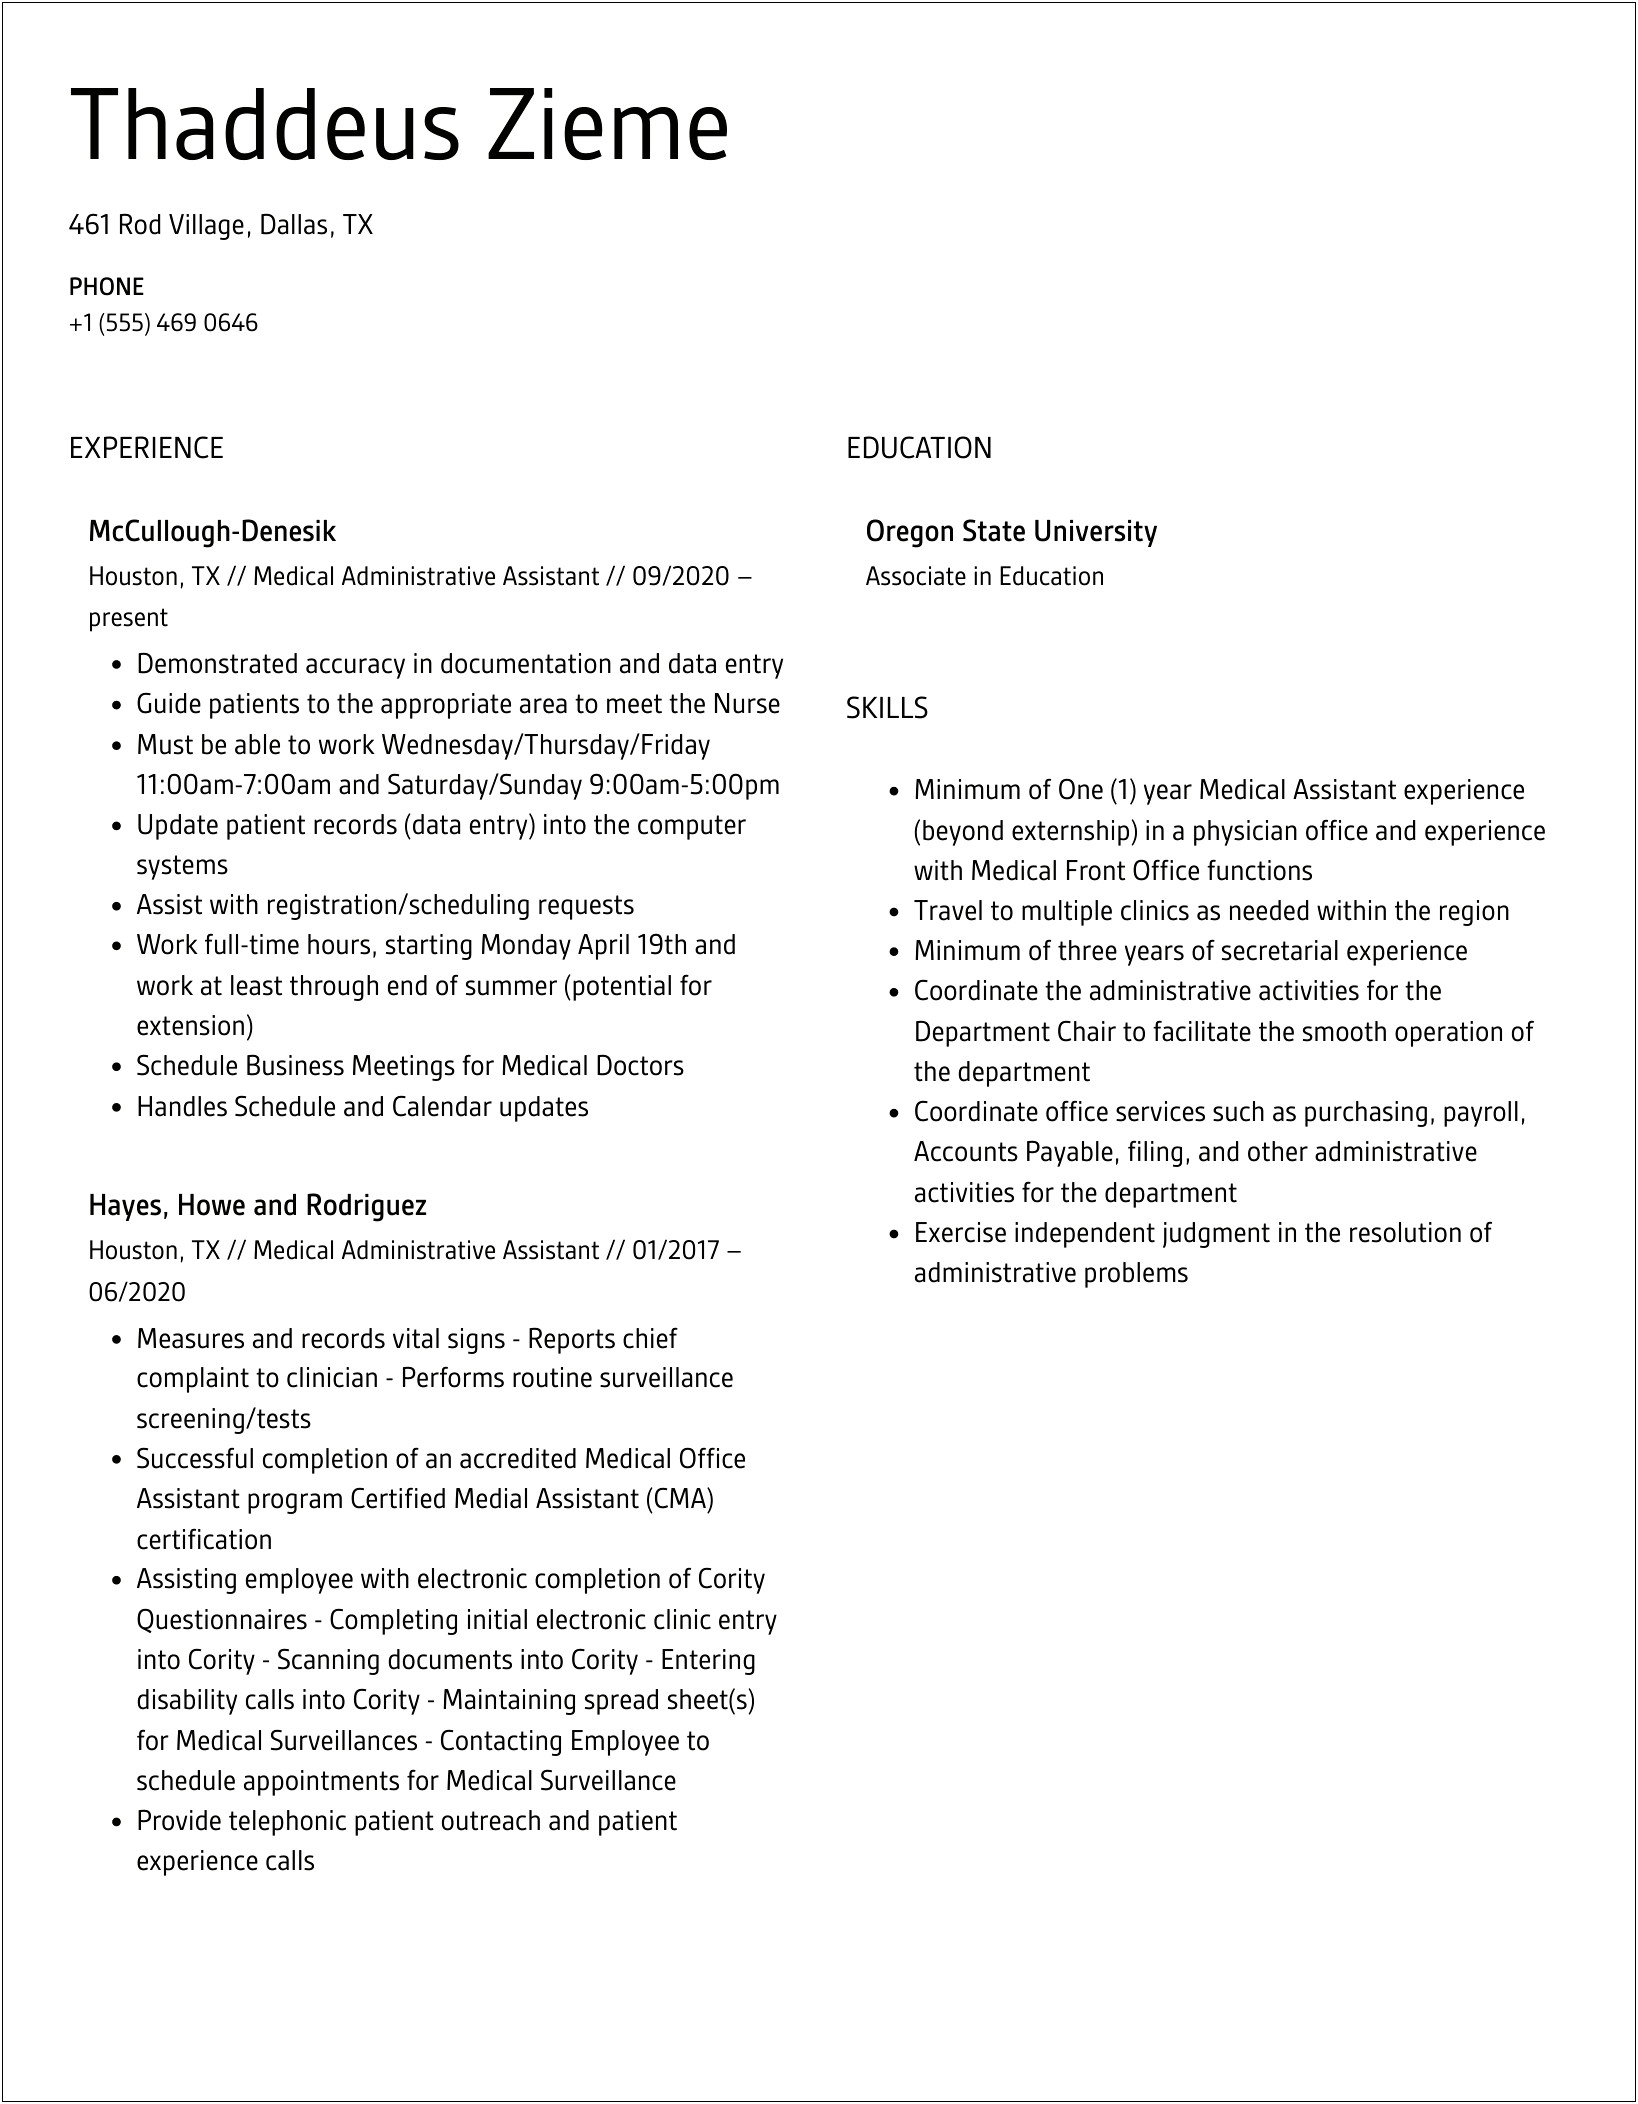 Medical Sample Resume In Administrative Associate Surgical Service